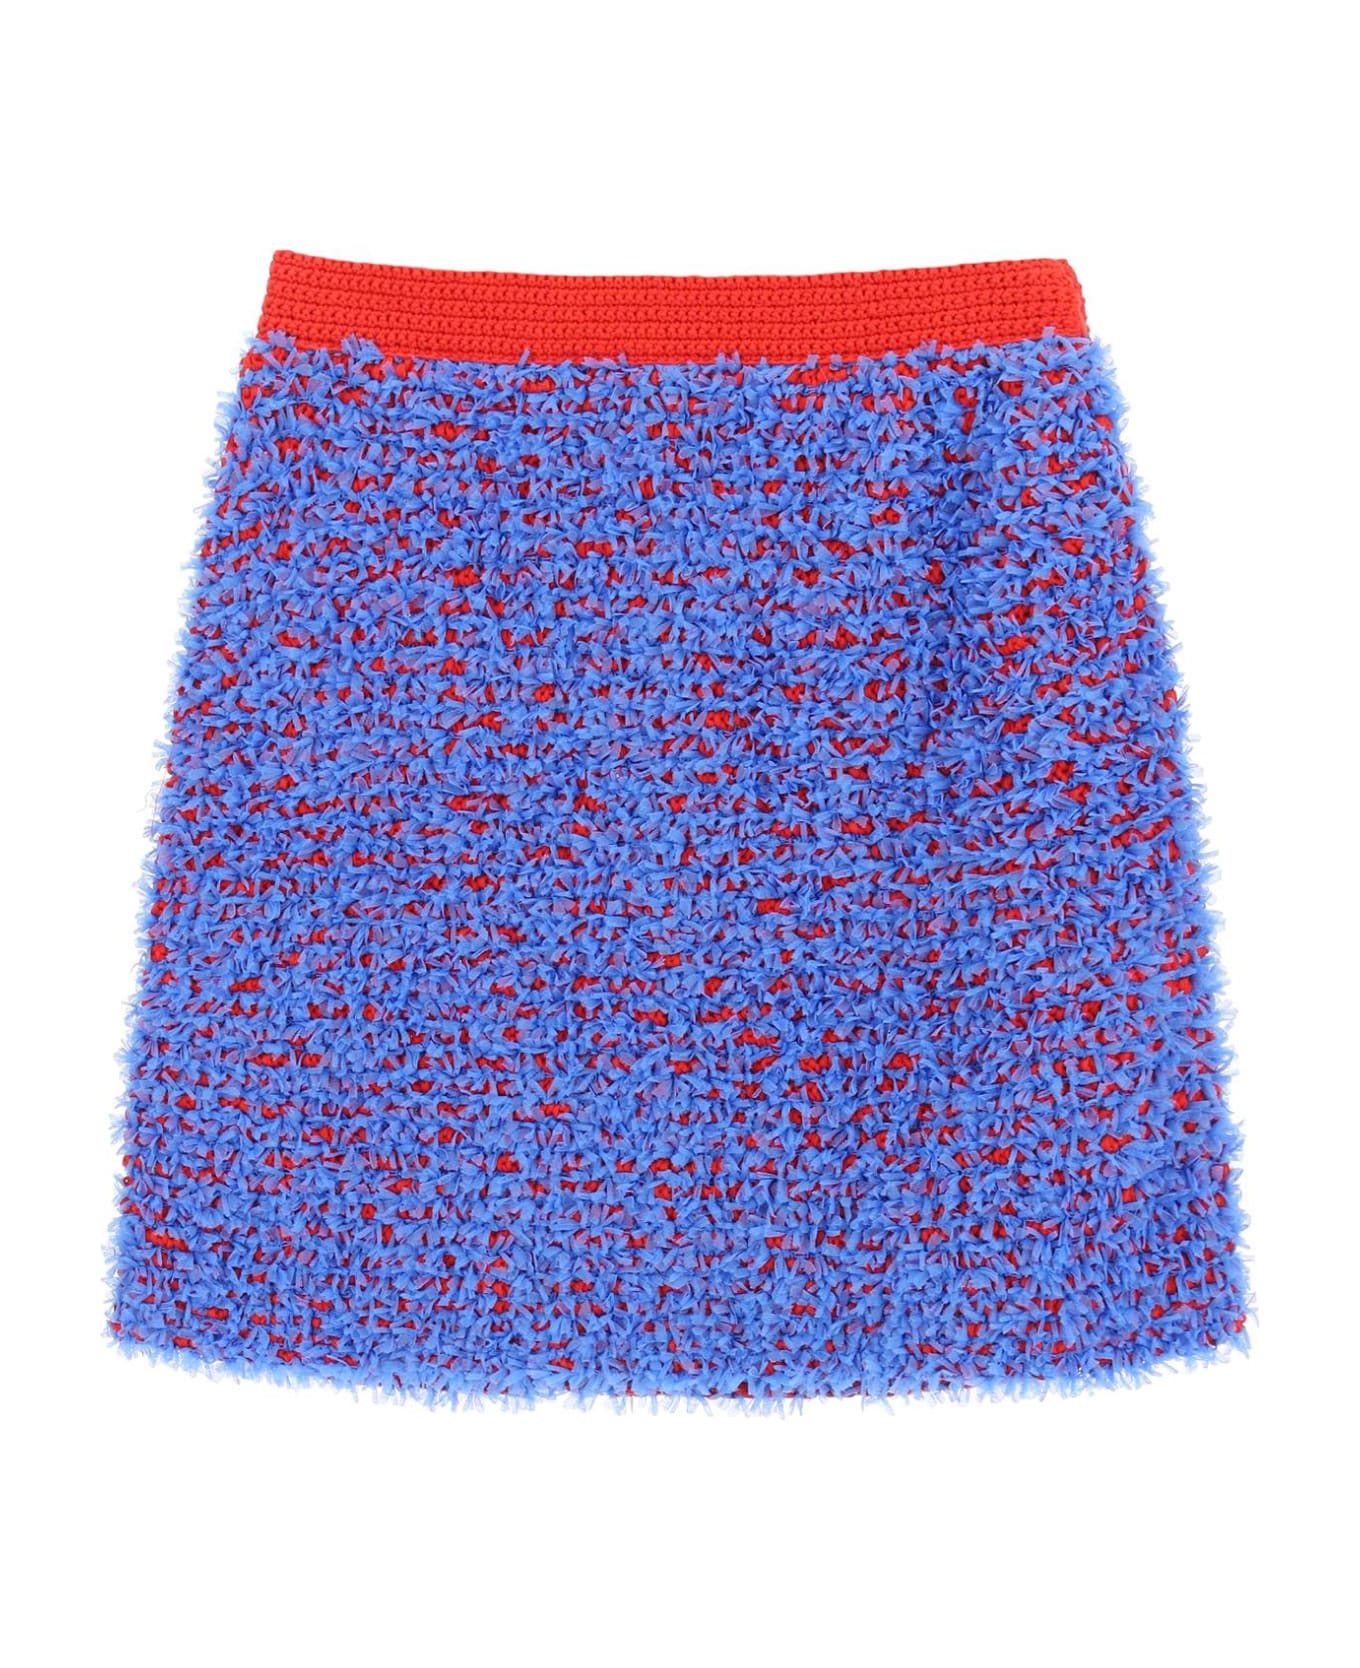 Tory Burch Tweed Mini Skirt - BLUE COSMO RED CHILI (Red) スカート